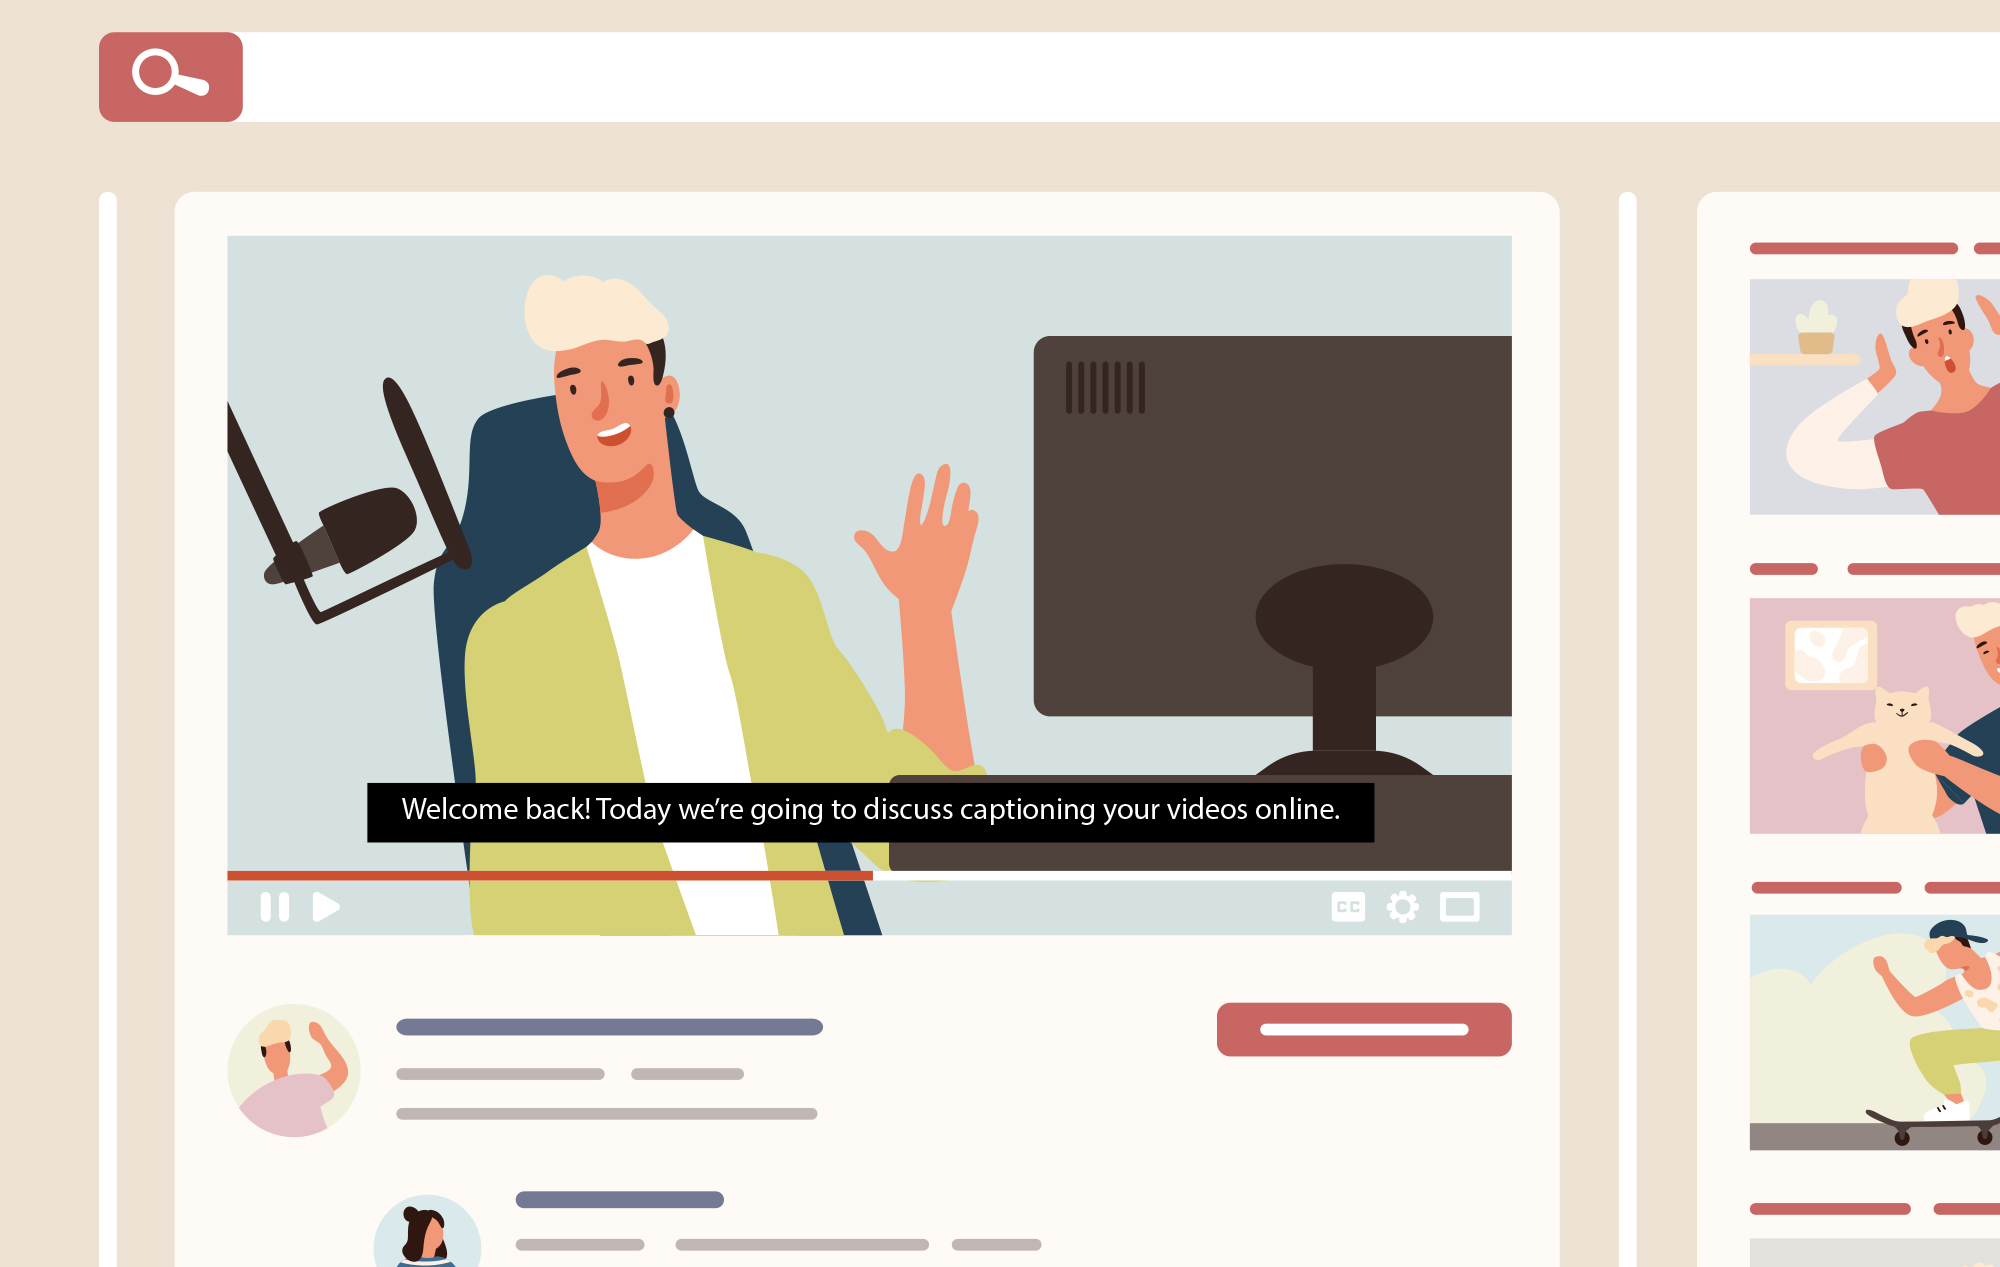 Illustration of YouTube interface playing video of a person at their desk, talking into a mic, waving. Video caption says 'Welcome back. Today we're going to discuss captioning your videos online.'